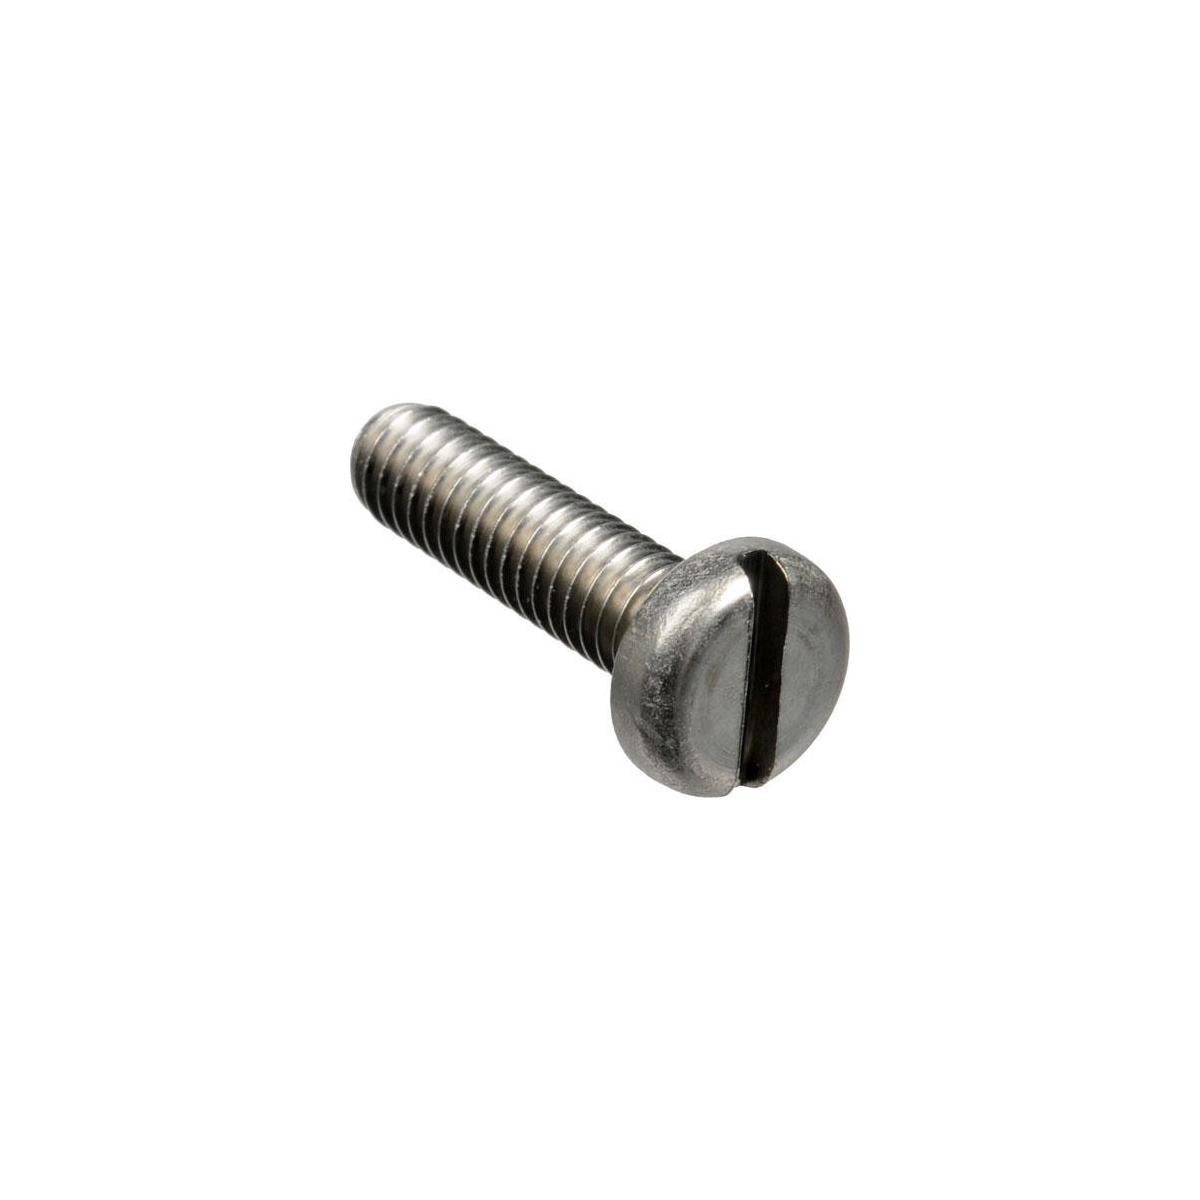 Image of Ikelite Bolts for Aluminum Tray and Handle to SLR Housings